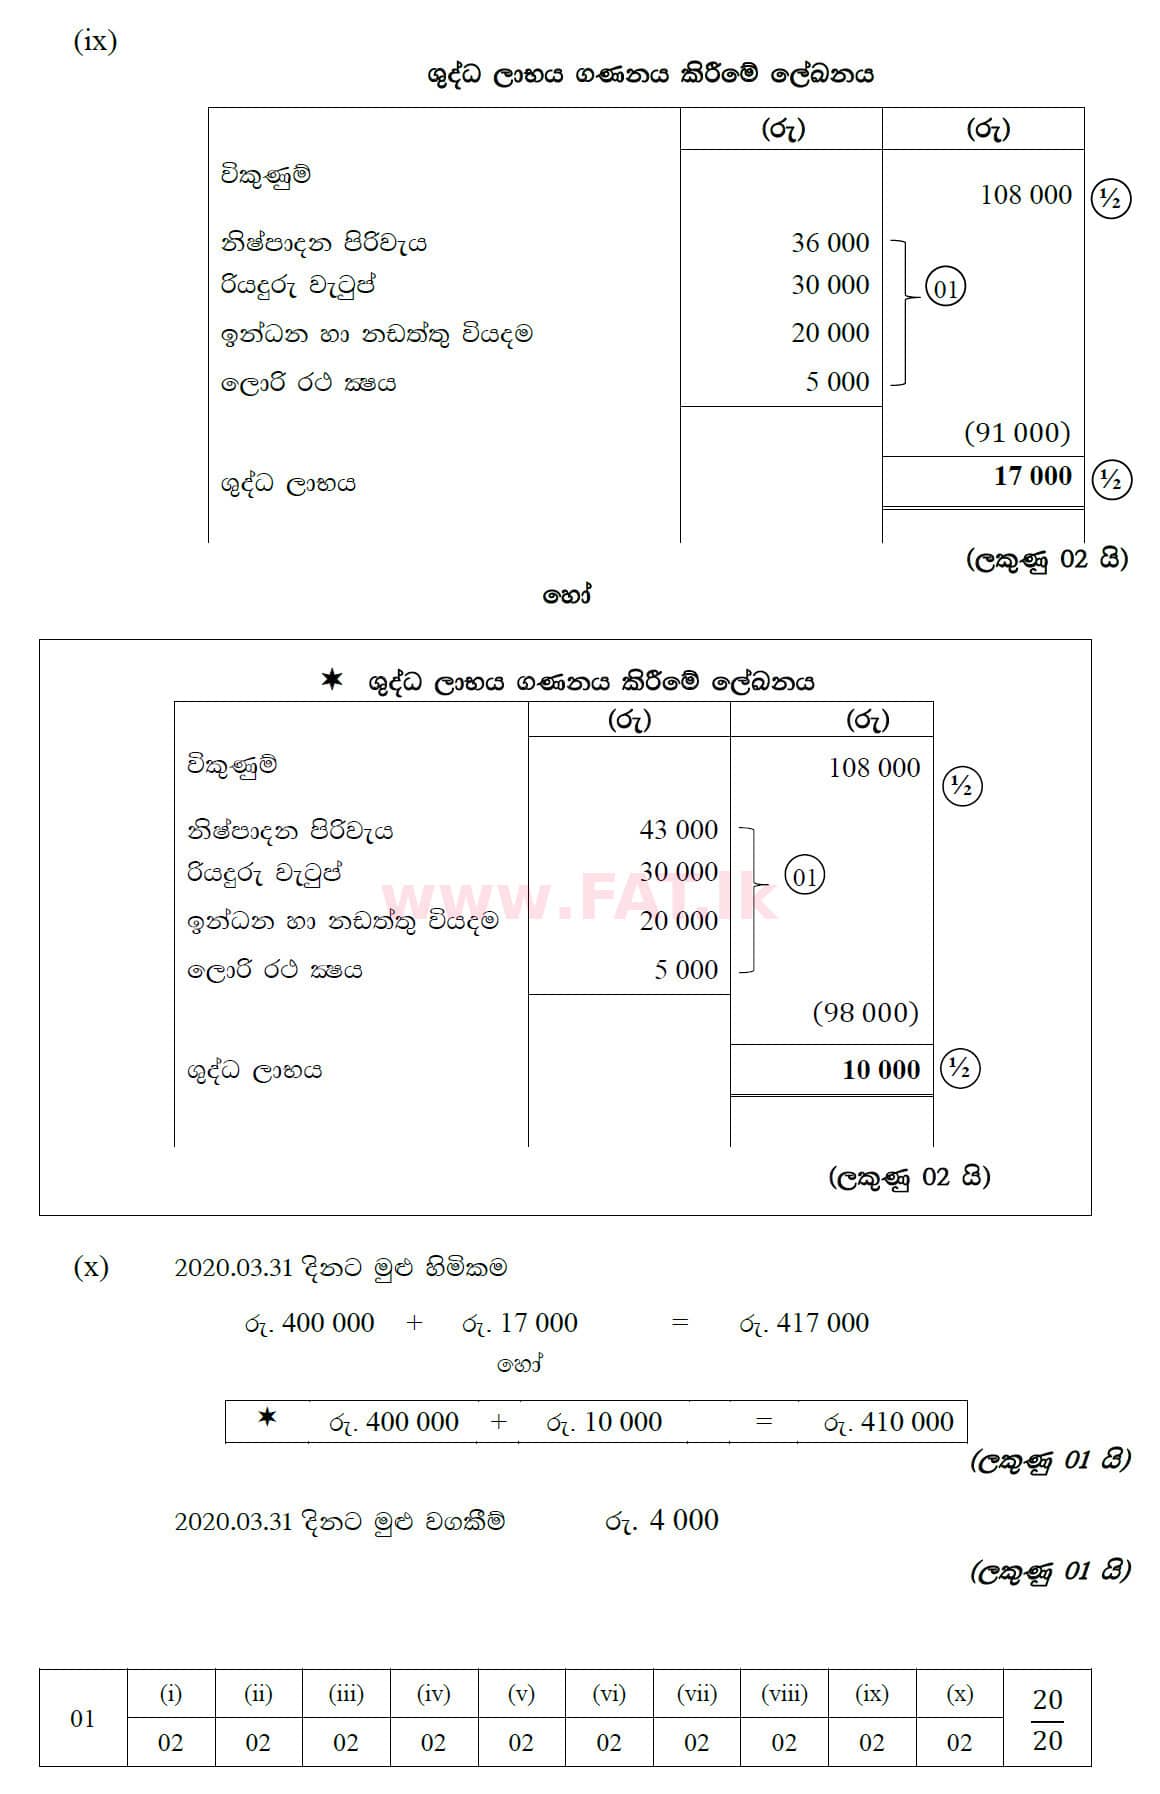 National Syllabus : Ordinary Level (O/L) Business and Accounting Studies - 2020 March - Paper II (සිංහල Medium) 1 5759